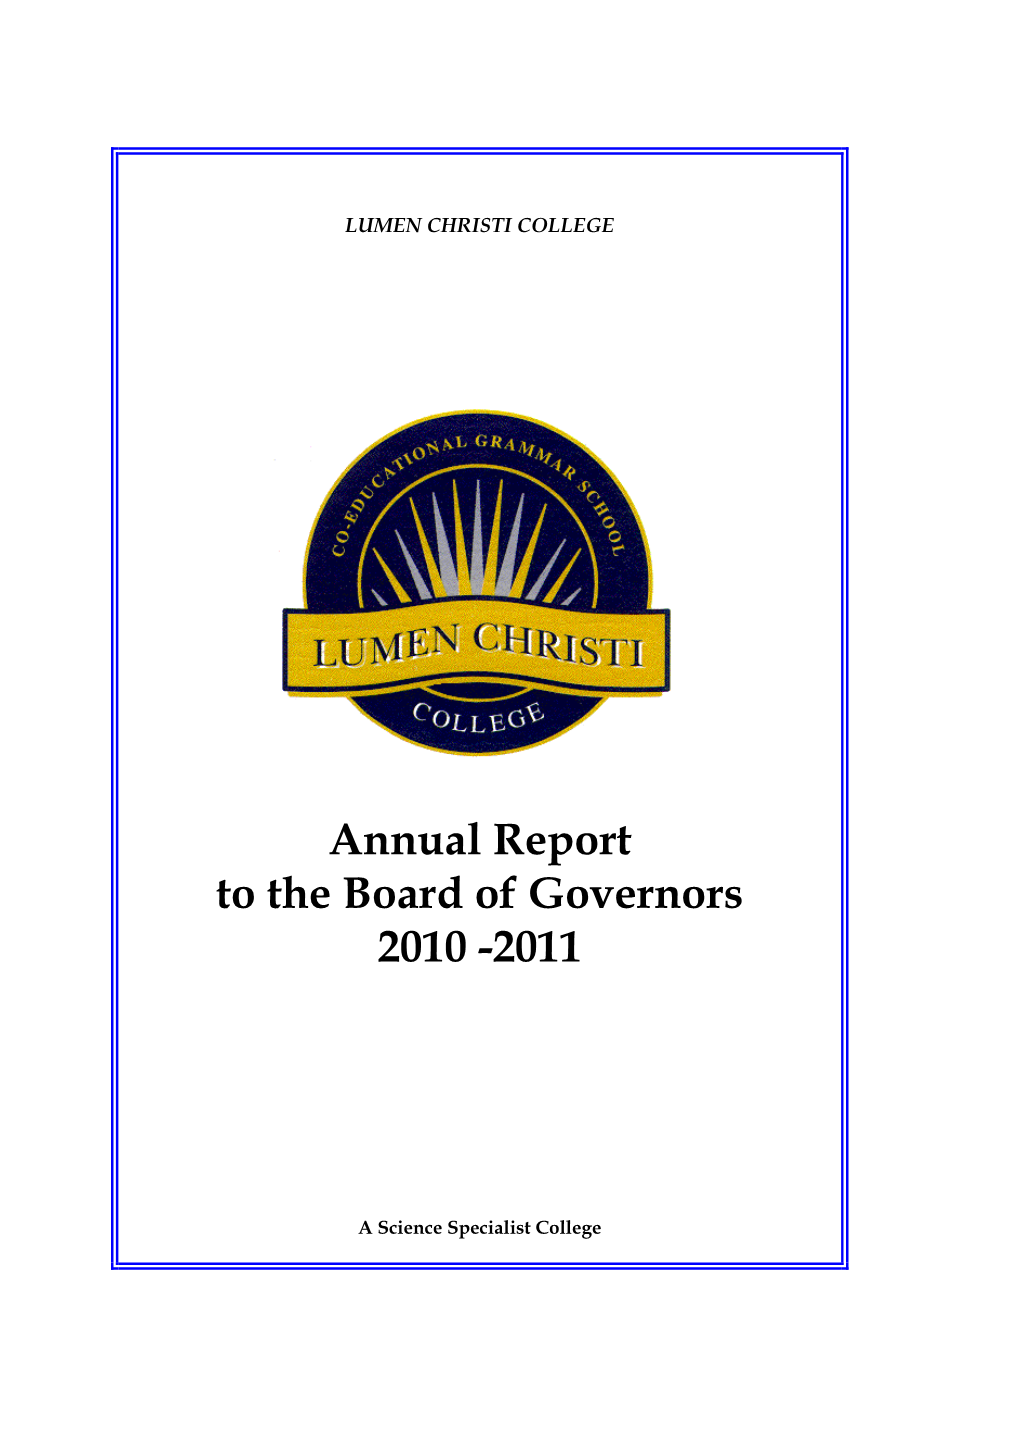 Board of Governors Report 2010-2011